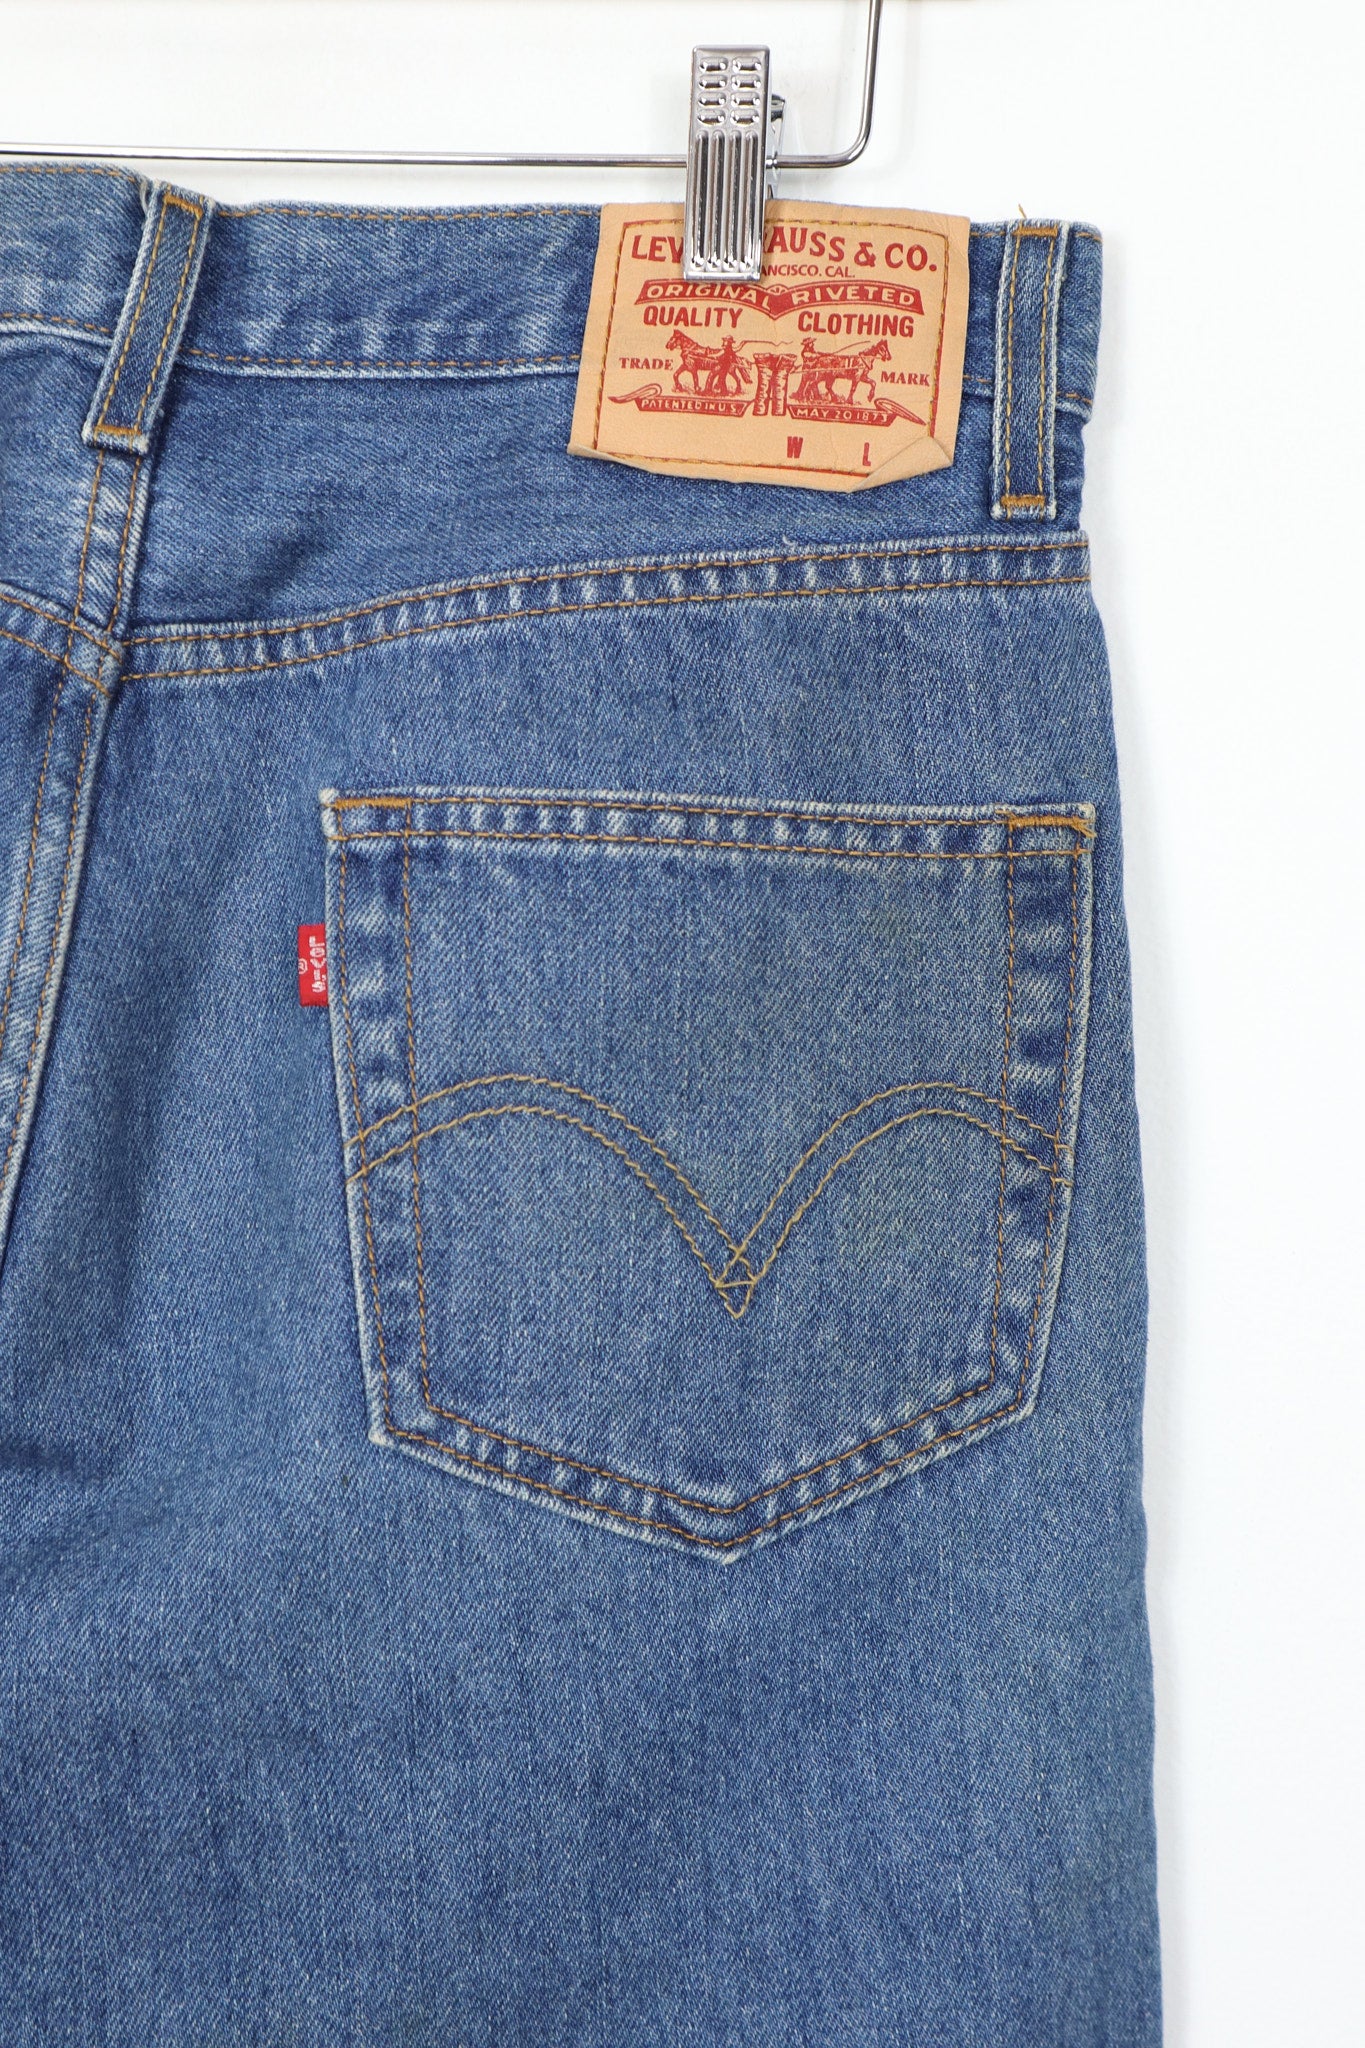 Vintage Levi's Relaxed Fit Jeans 02